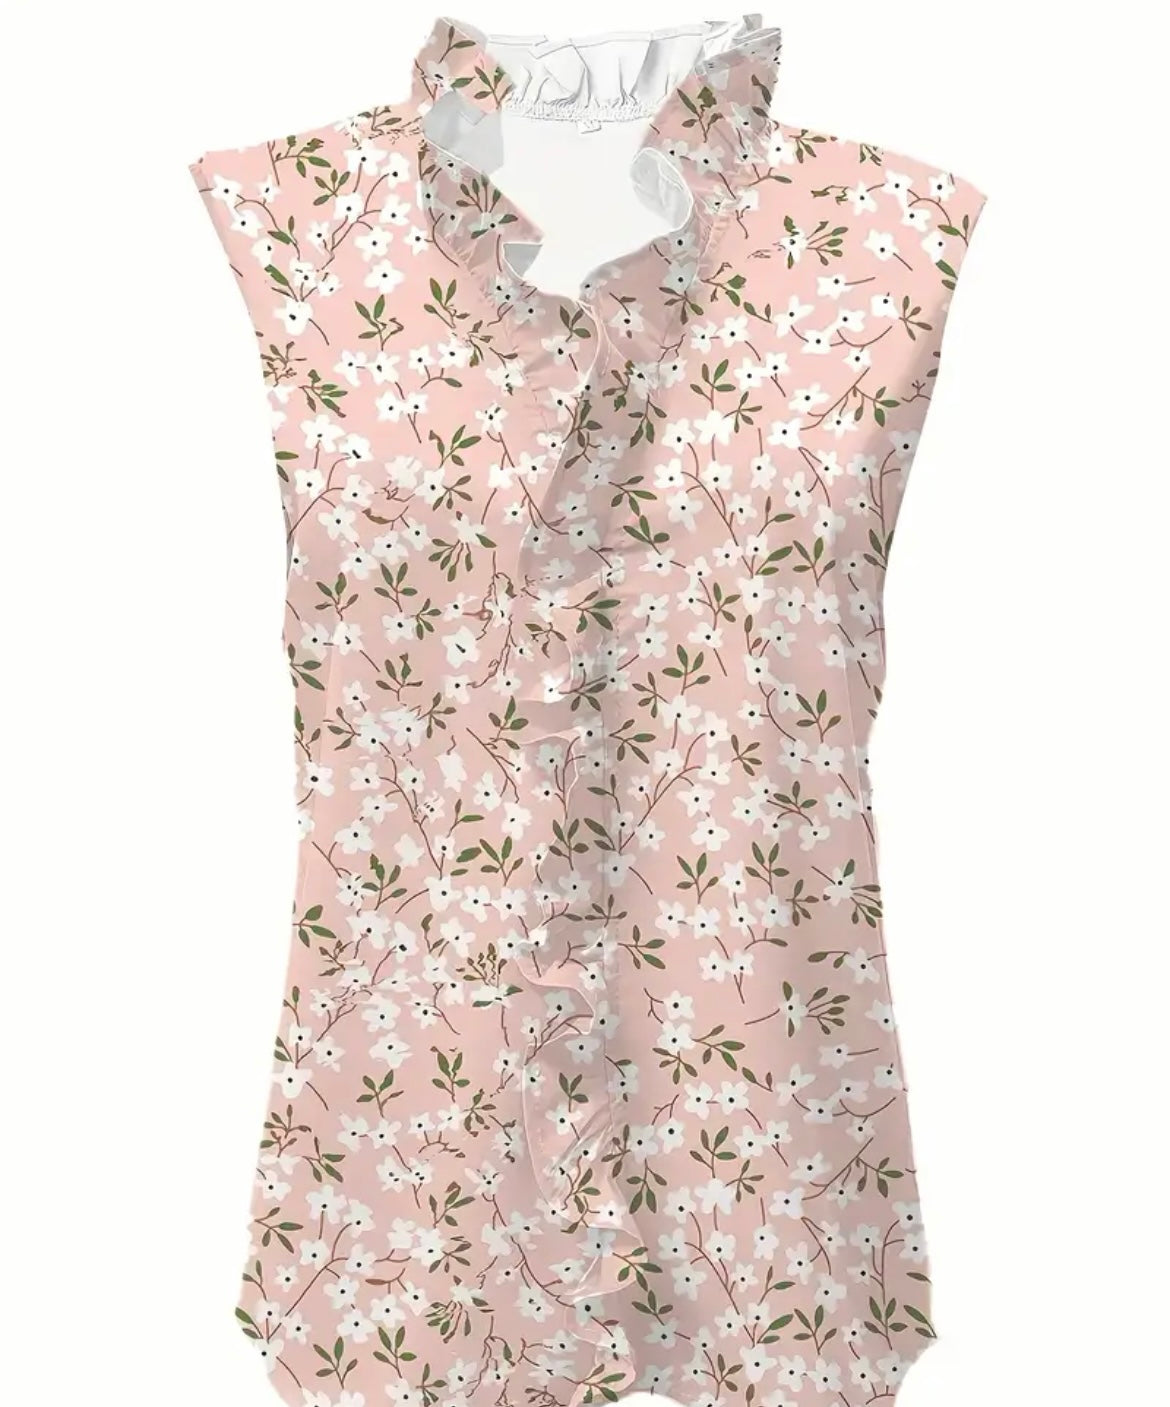 Pink Floral Sleeveless Top with Ruffle Detail